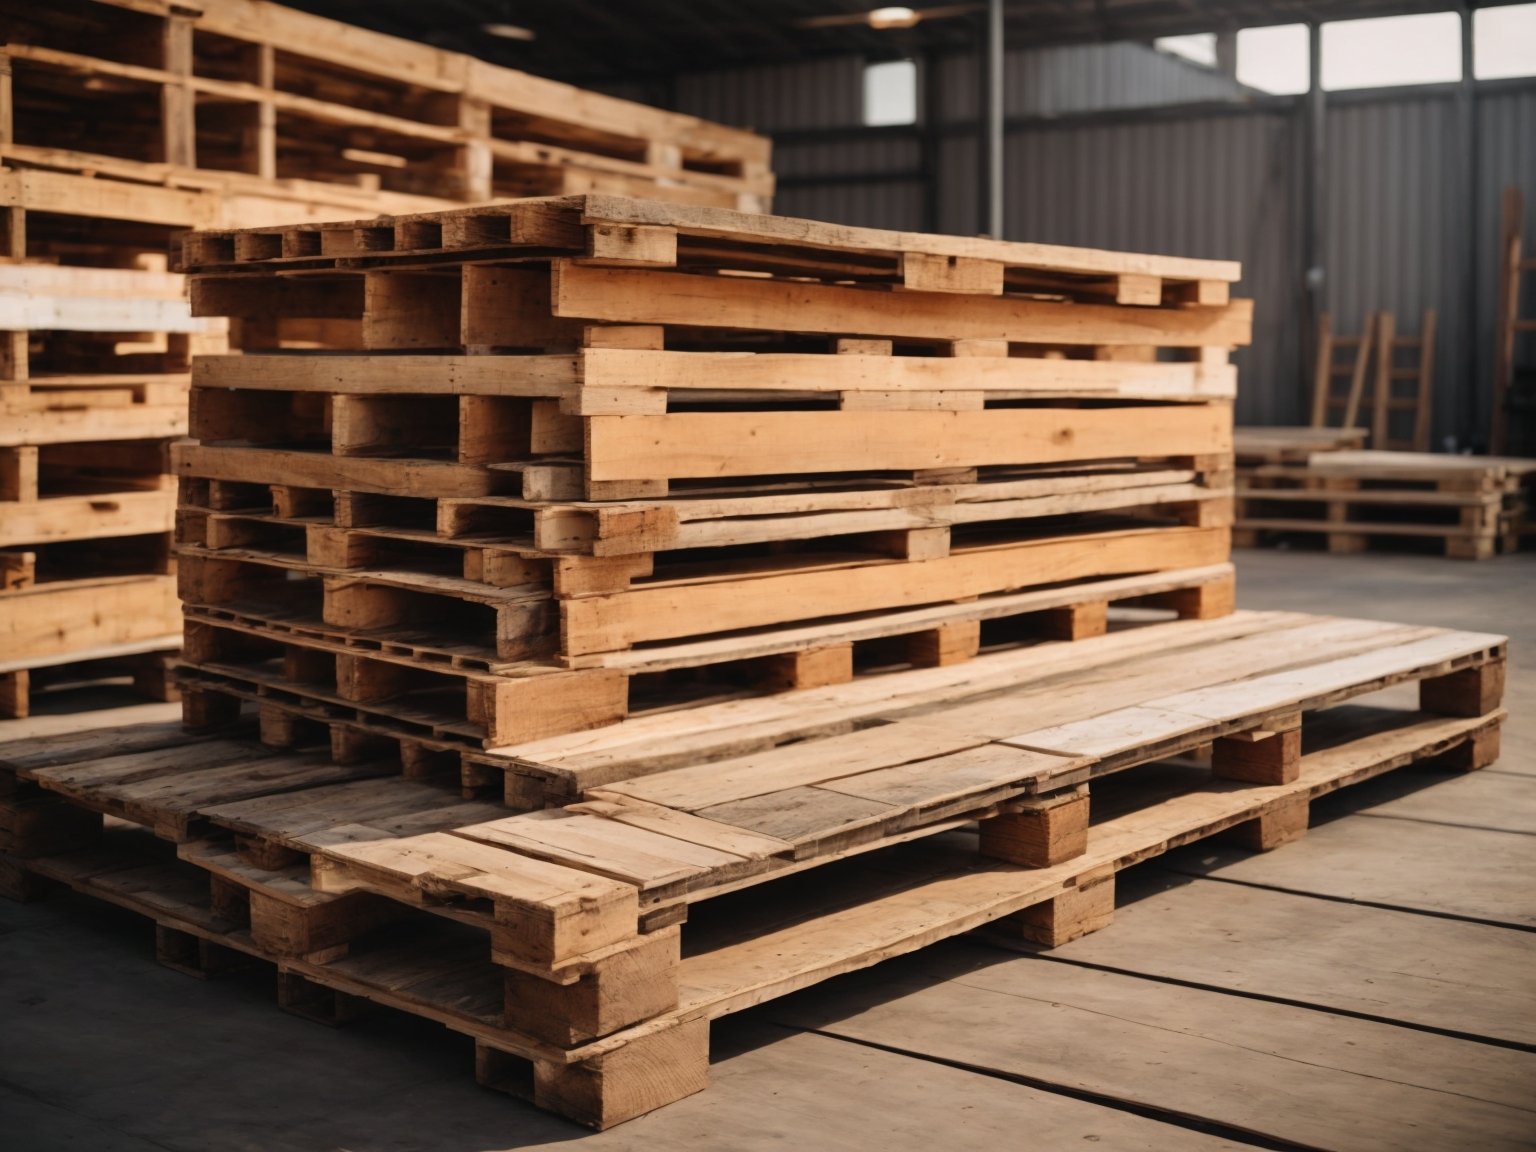 how-much-does-a-wooden-pallet-cost-a-friendly-guide-to-pricing-2